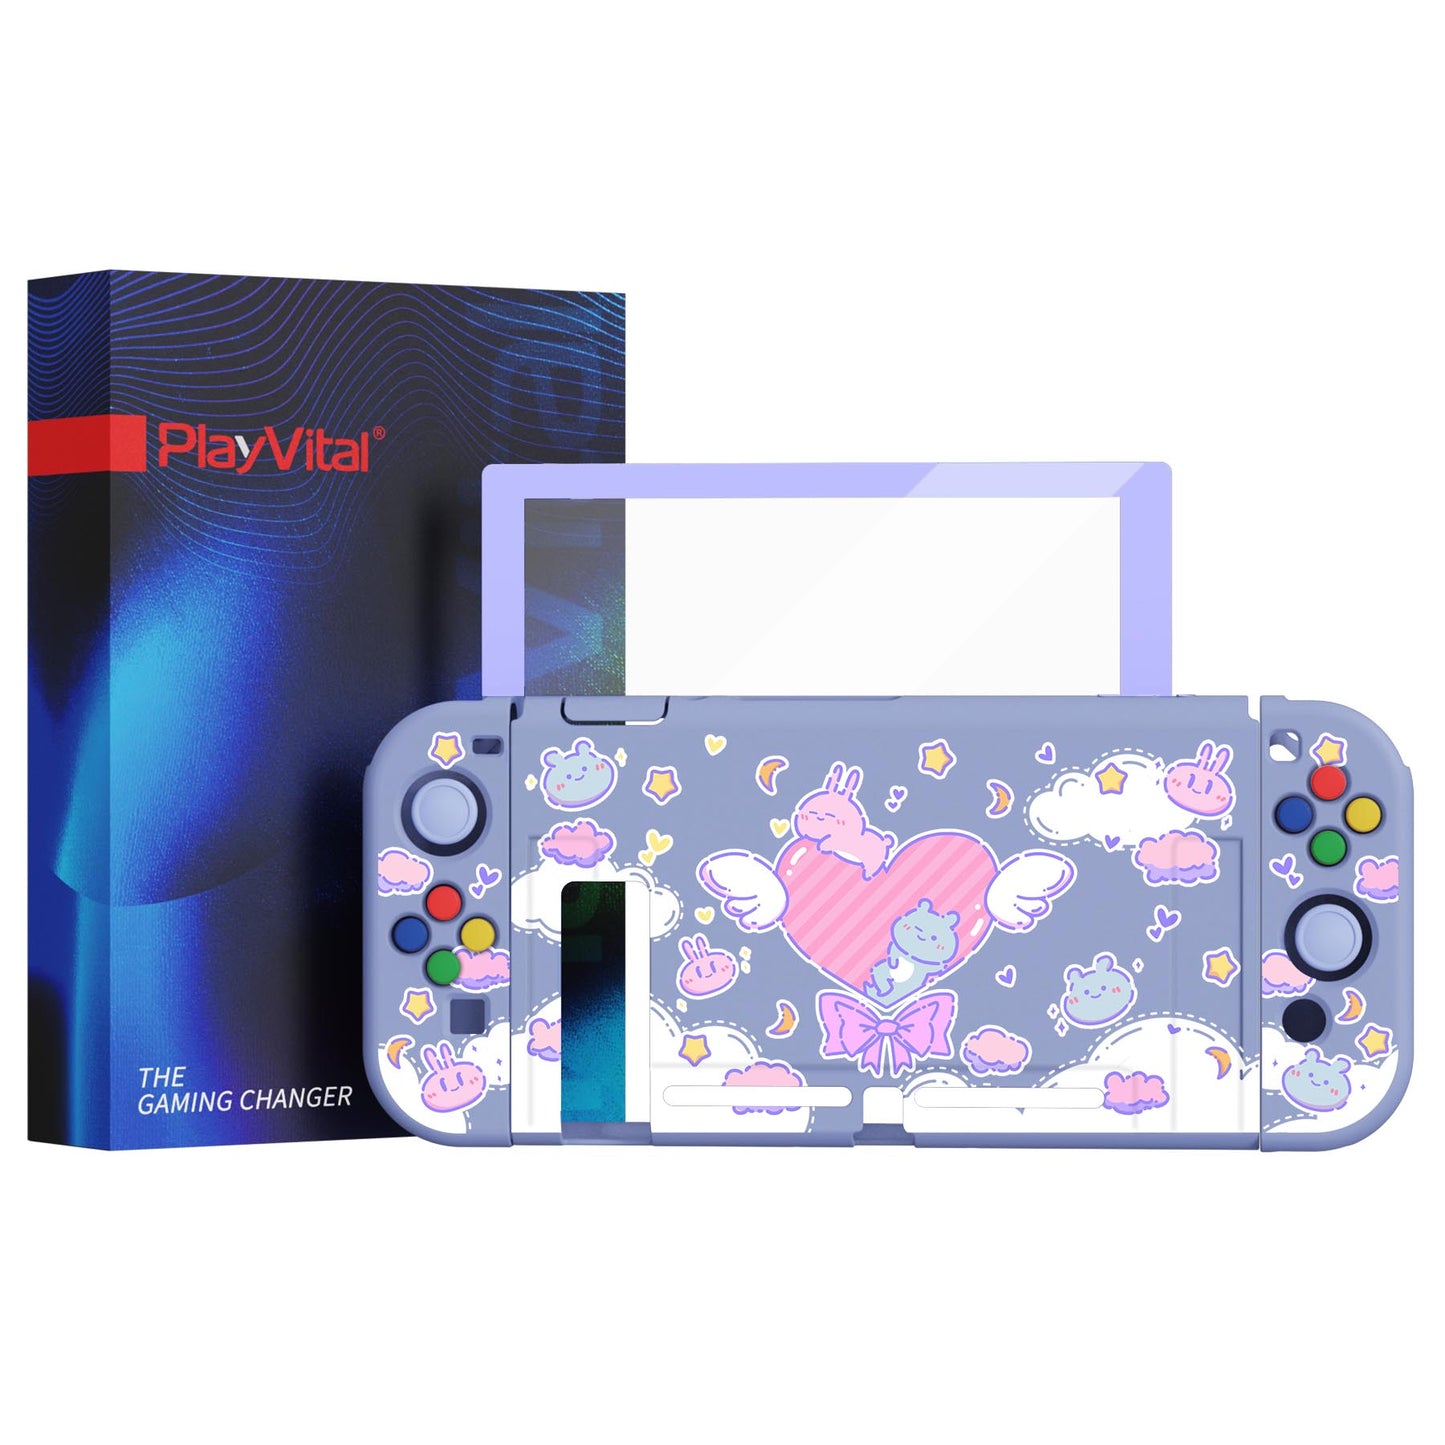 PlayVital ZealProtect Soft Protective Case for Nintendo Switch, Flexible Cover for Switch with Tempered Glass Screen Protector & Thumb Grips & ABXY Direction Button Caps - Fantasy Bunny & Bear - RNSYV6010 playvital